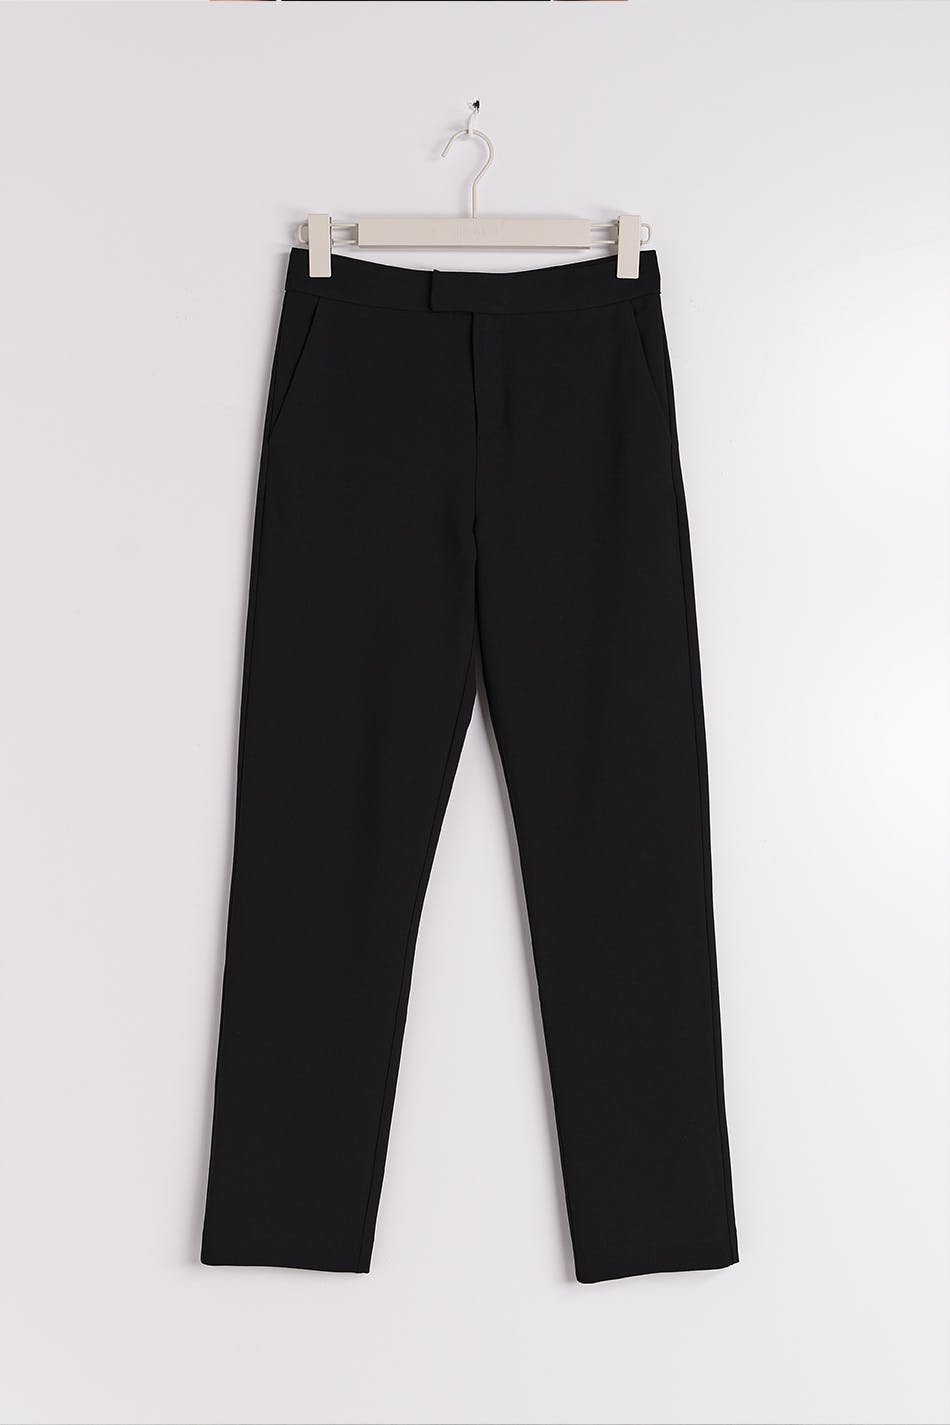 Tall trousers – Discover our extra long trousers - Gina Tricot